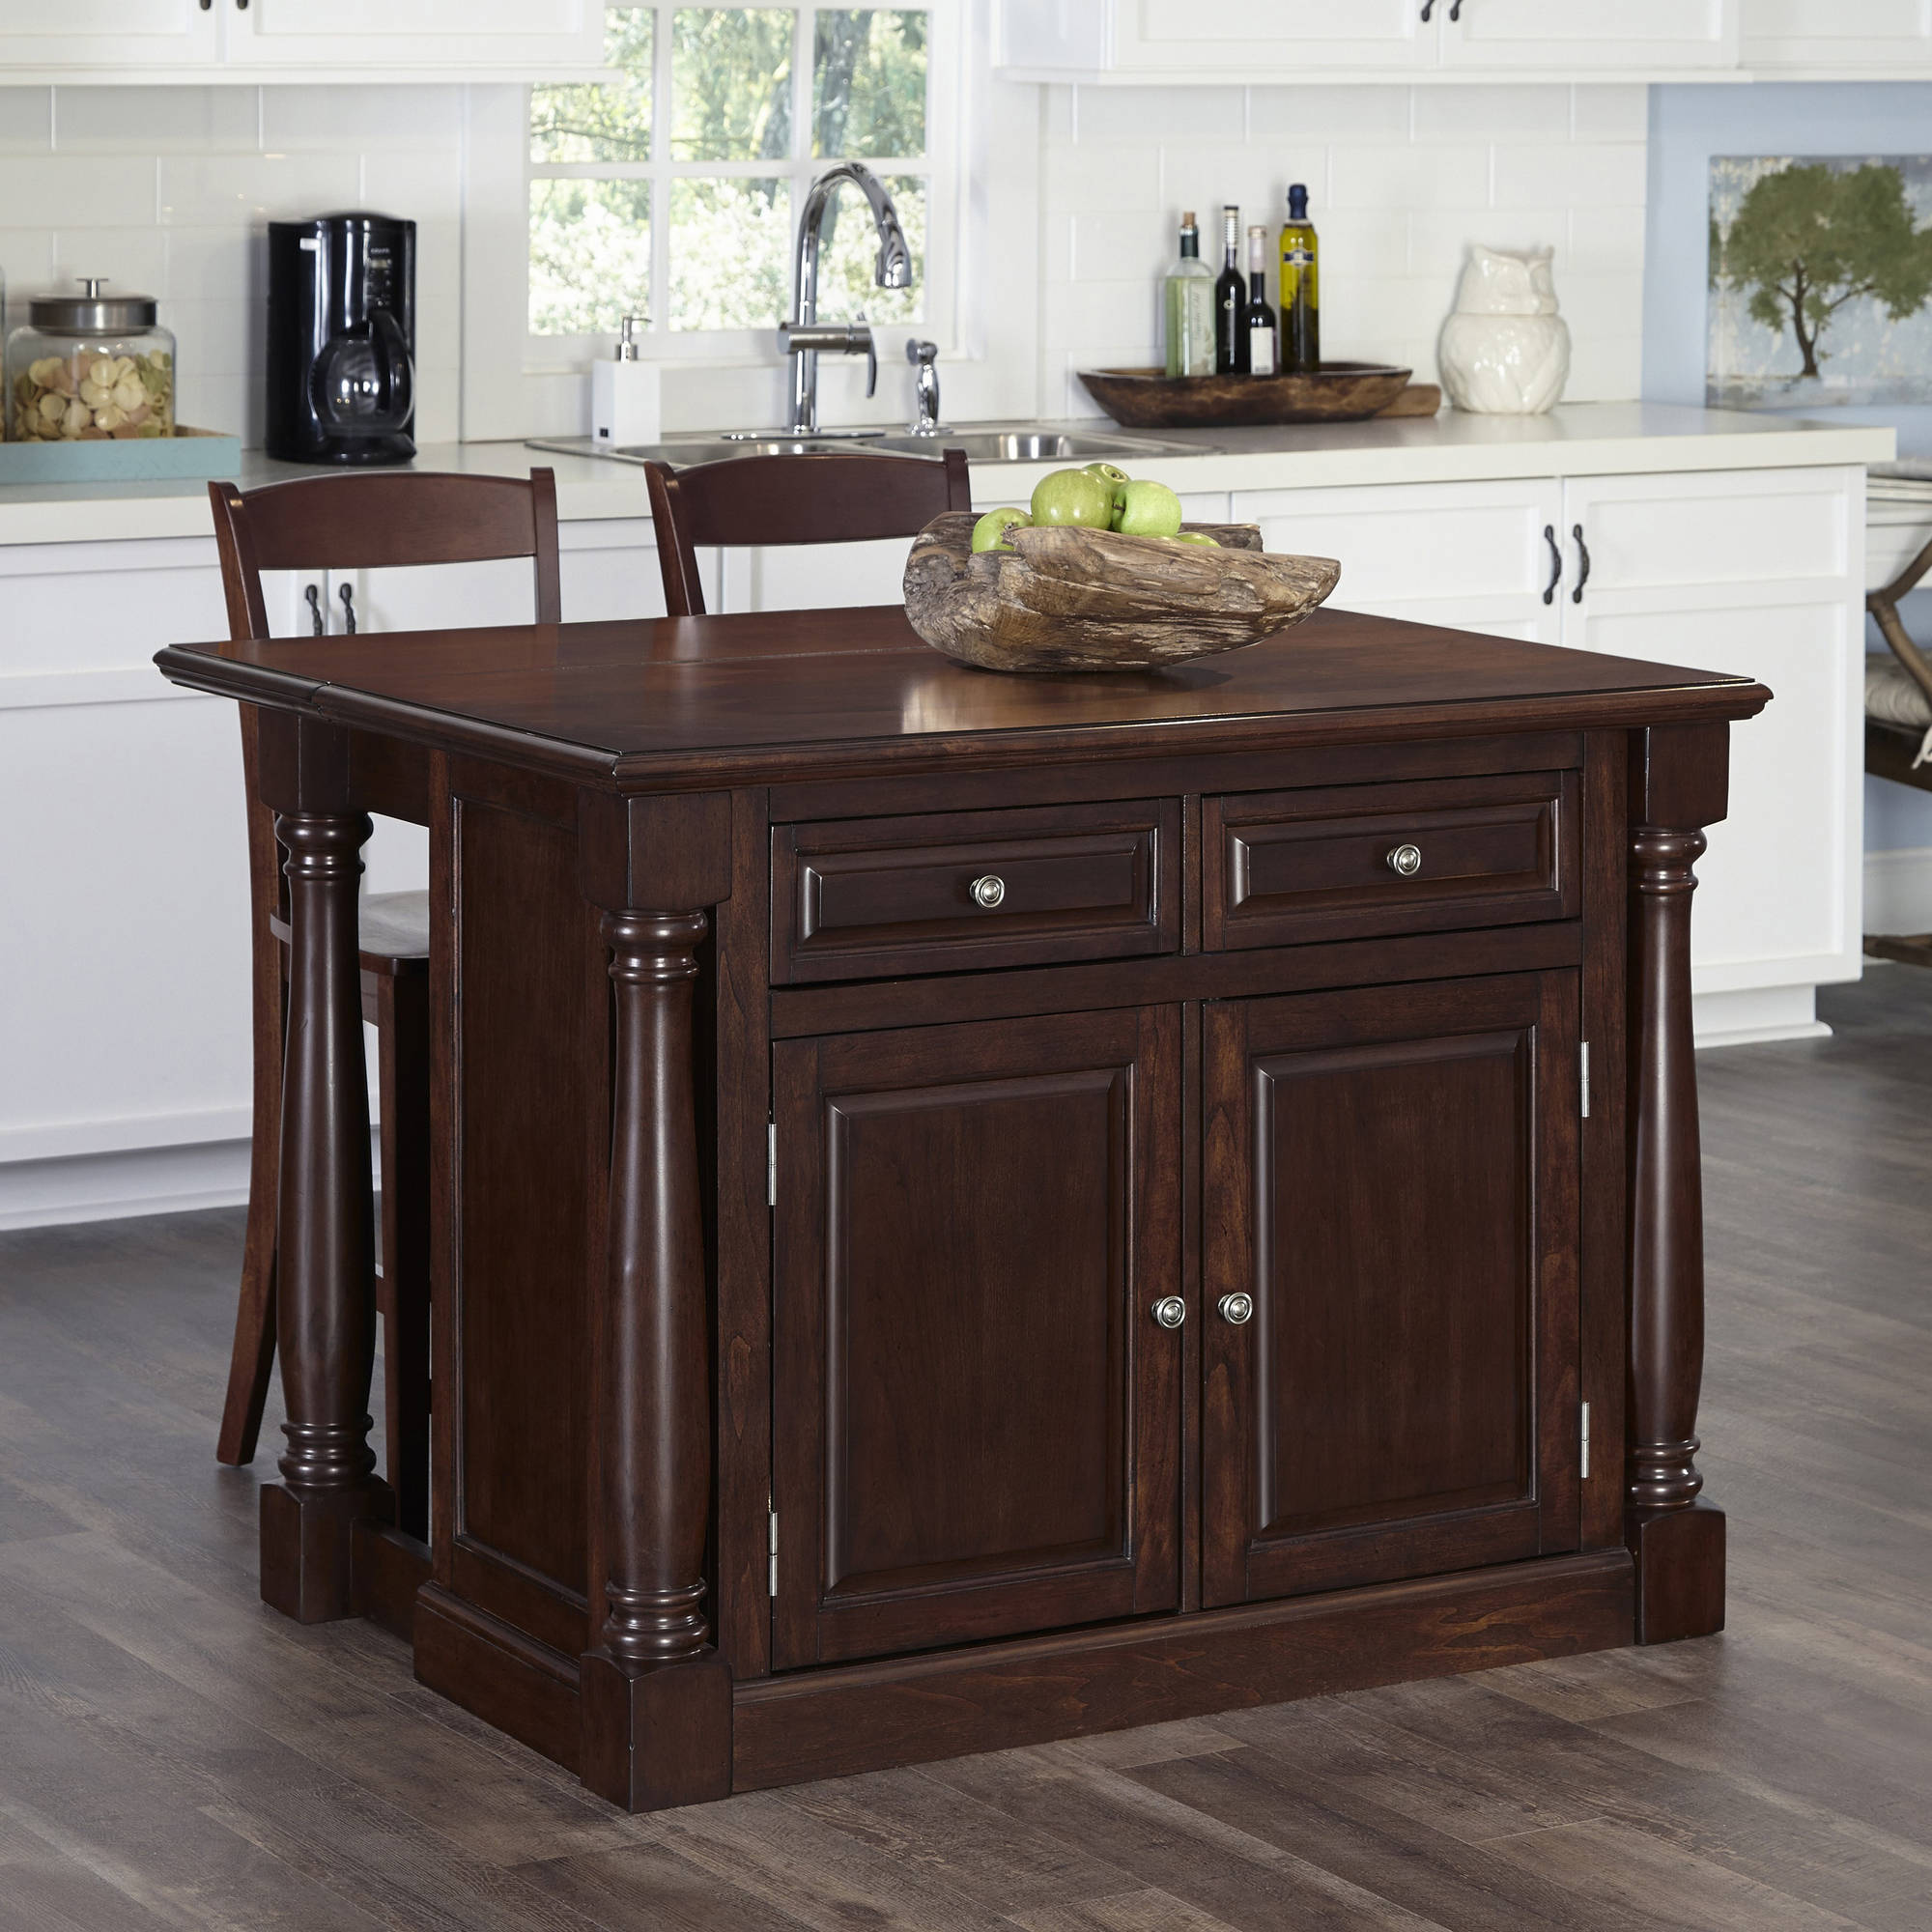 Kitchen Island with Two Stools in Cherry Finish  Walmart.com